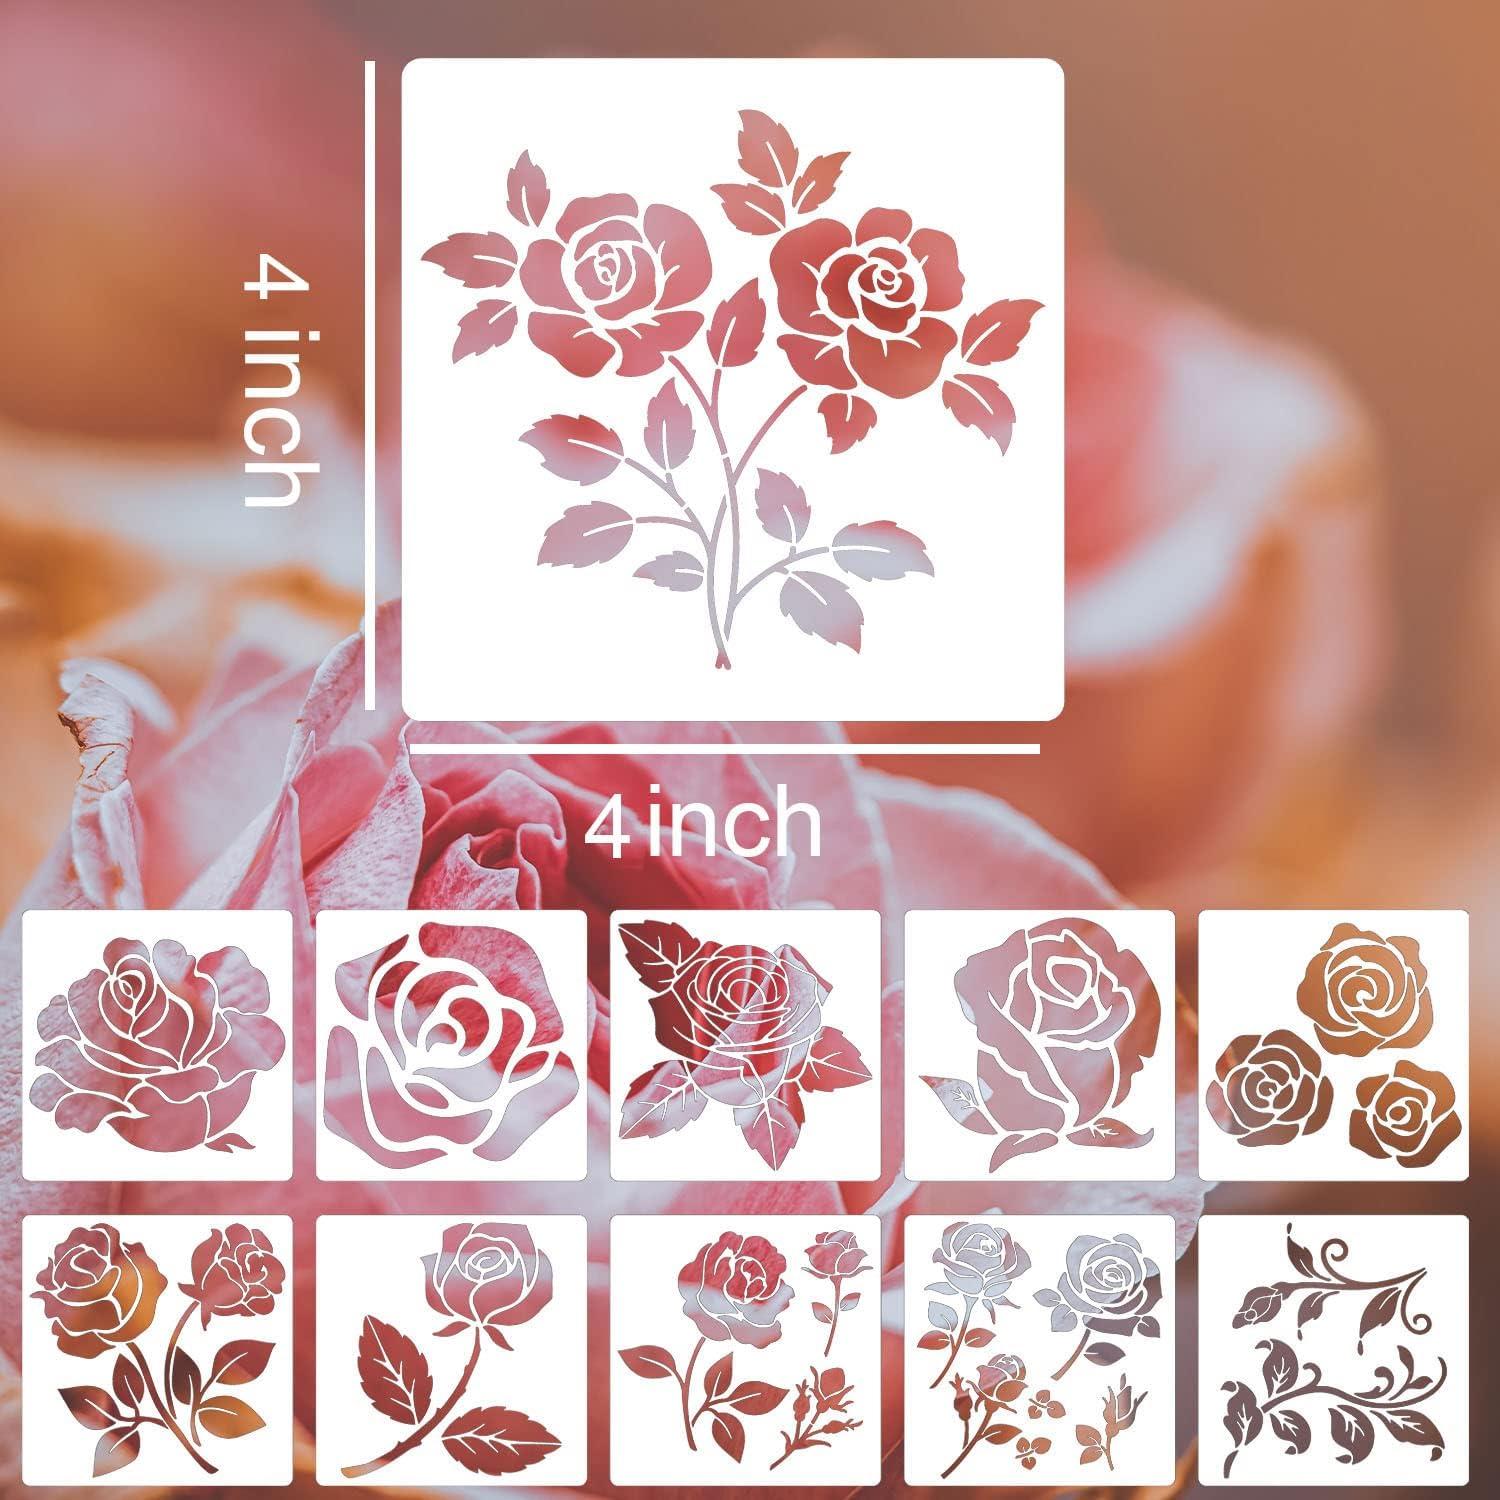 Rose Stencils 4inch Reusable Flower Stencils for Painting on Wood Floral  Stencil Flowers Drawing Templates for Wall Canvas Paper Porch Art Crafts